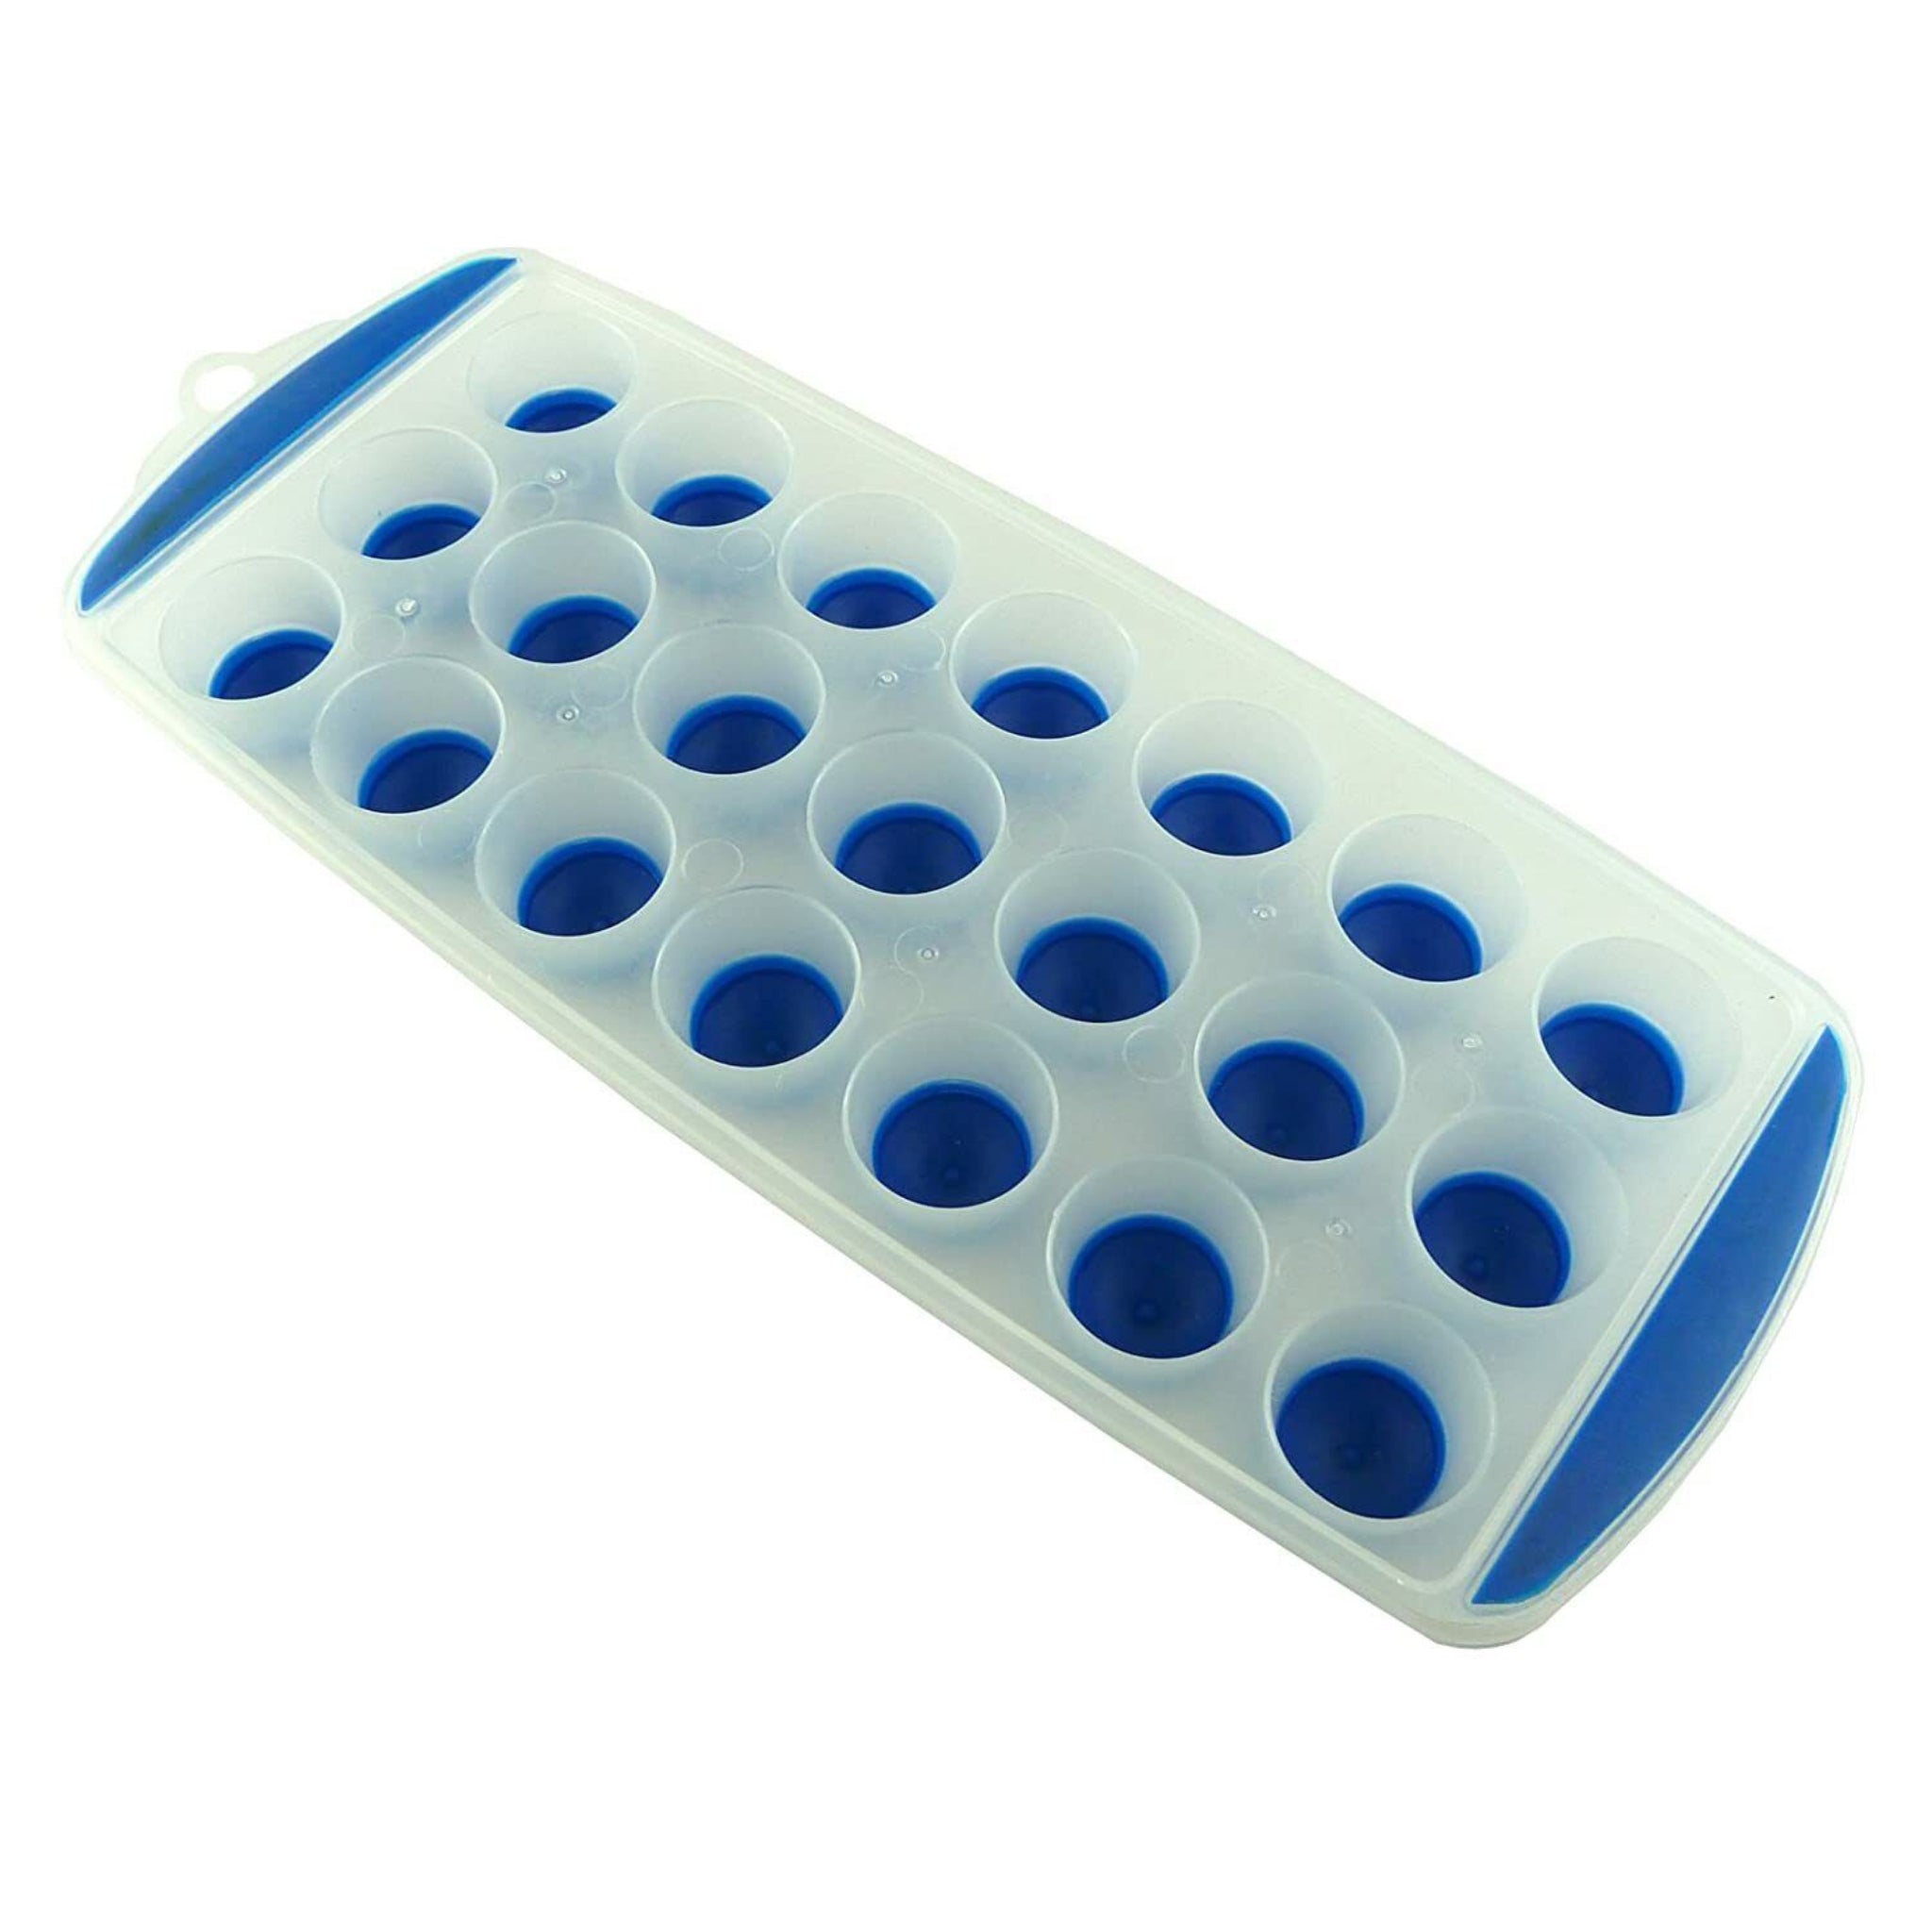 Beclen Harp Blue Color Silicon Ice Cube Easy Release Tray Mould-Perfect Home/Kitchen/Freezer Tool